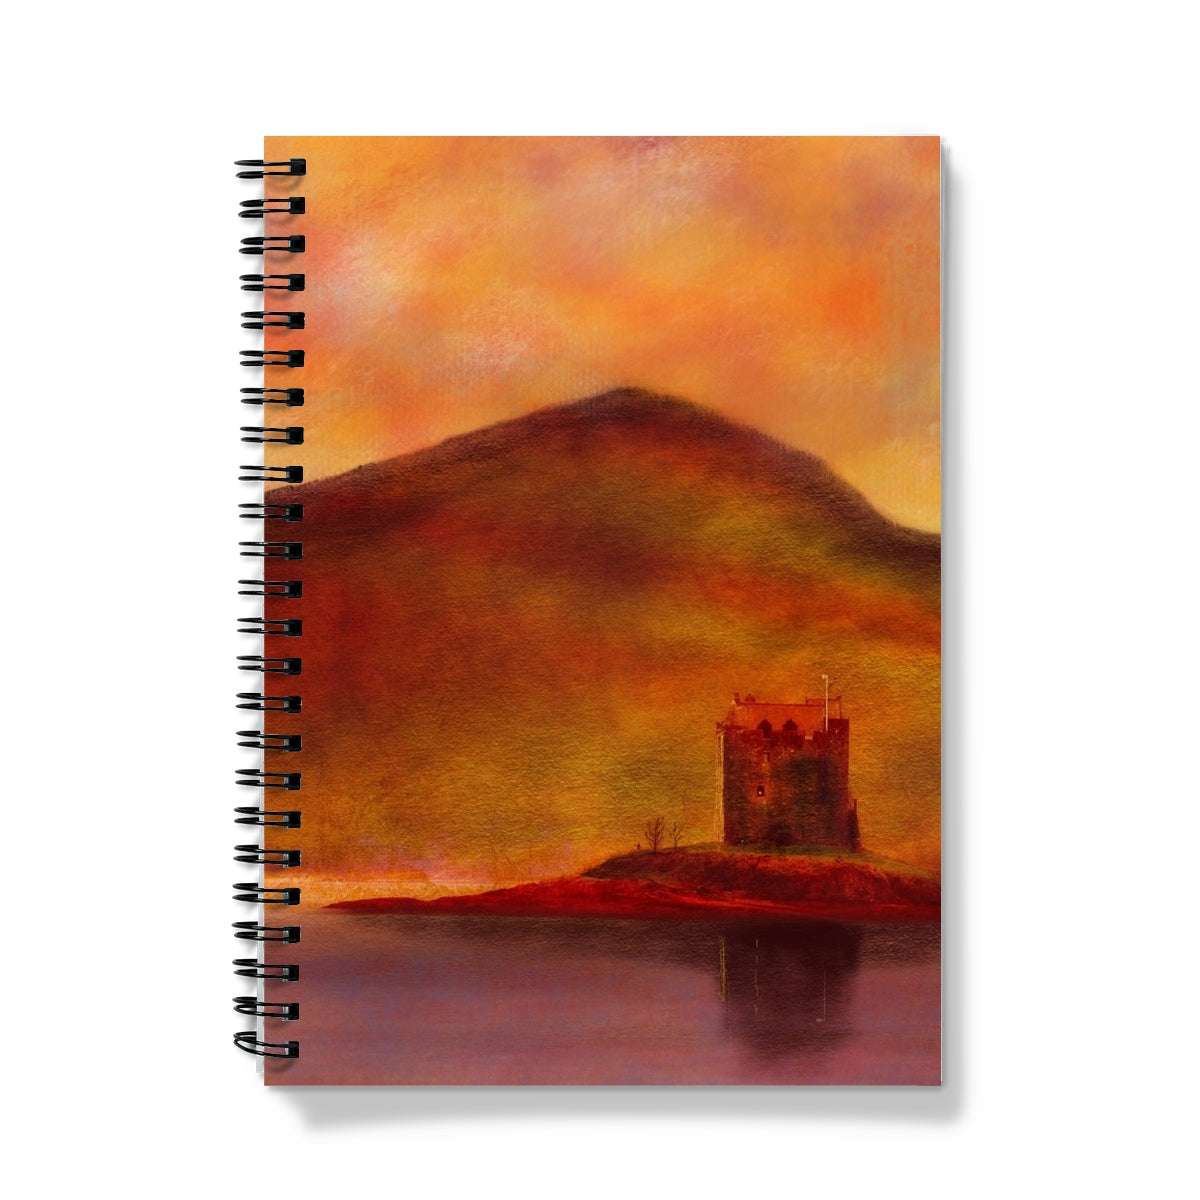 Castle Stalker Sunset Art Gifts Notebook-Journals & Notebooks-Historic & Iconic Scotland Art Gallery-A4-Lined-Paintings, Prints, Homeware, Art Gifts From Scotland By Scottish Artist Kevin Hunter